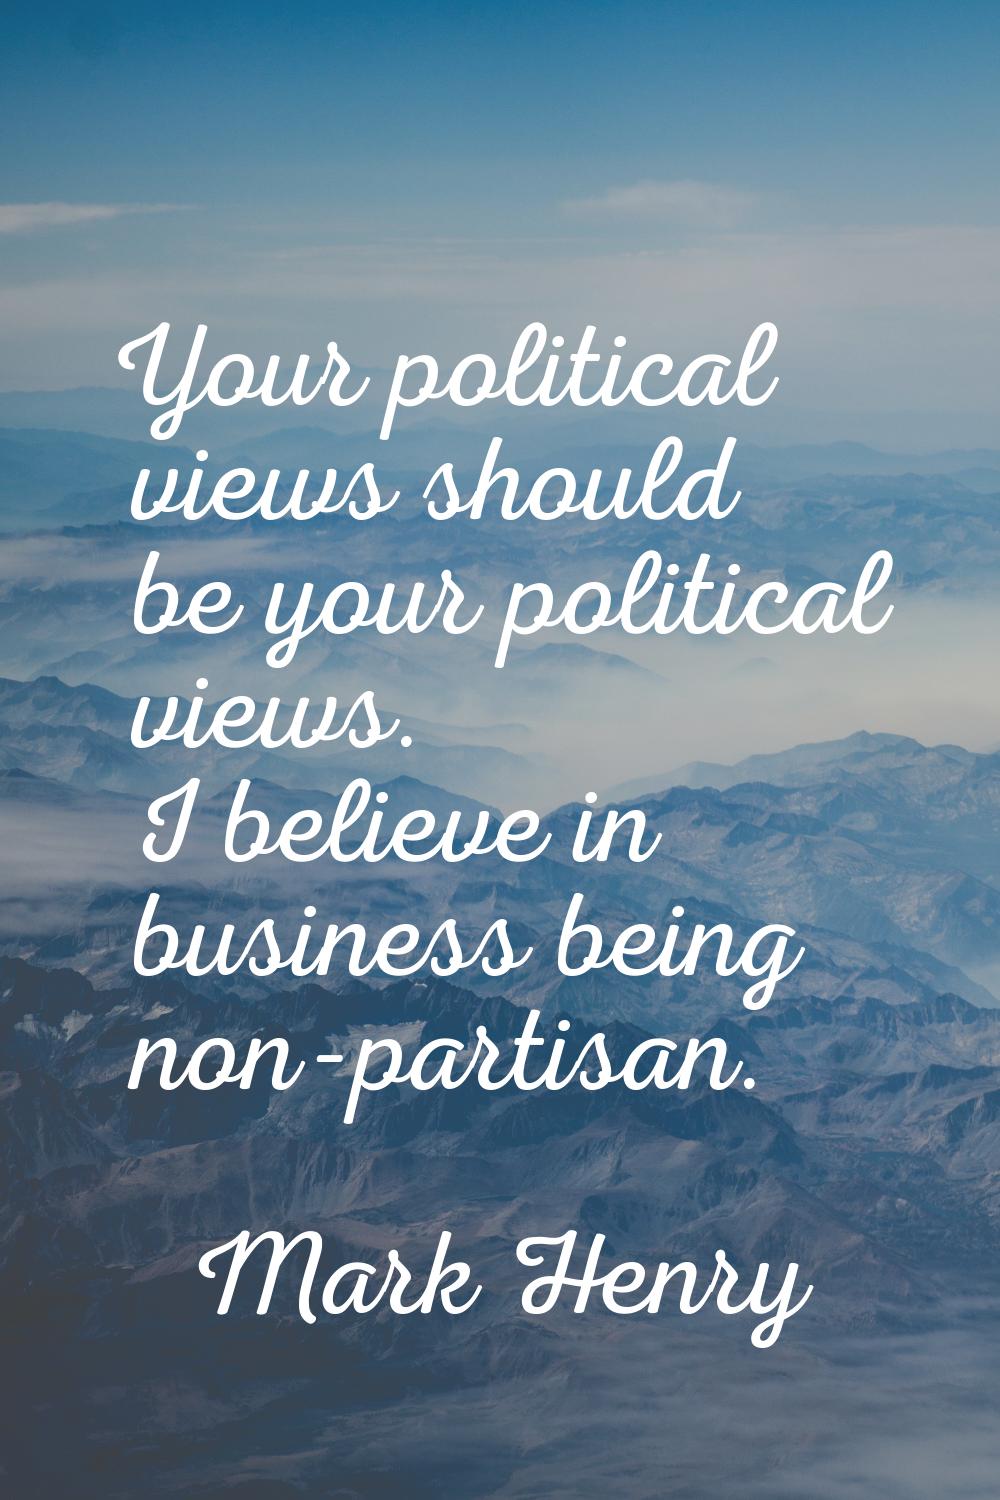 Your political views should be your political views. I believe in business being non-partisan.